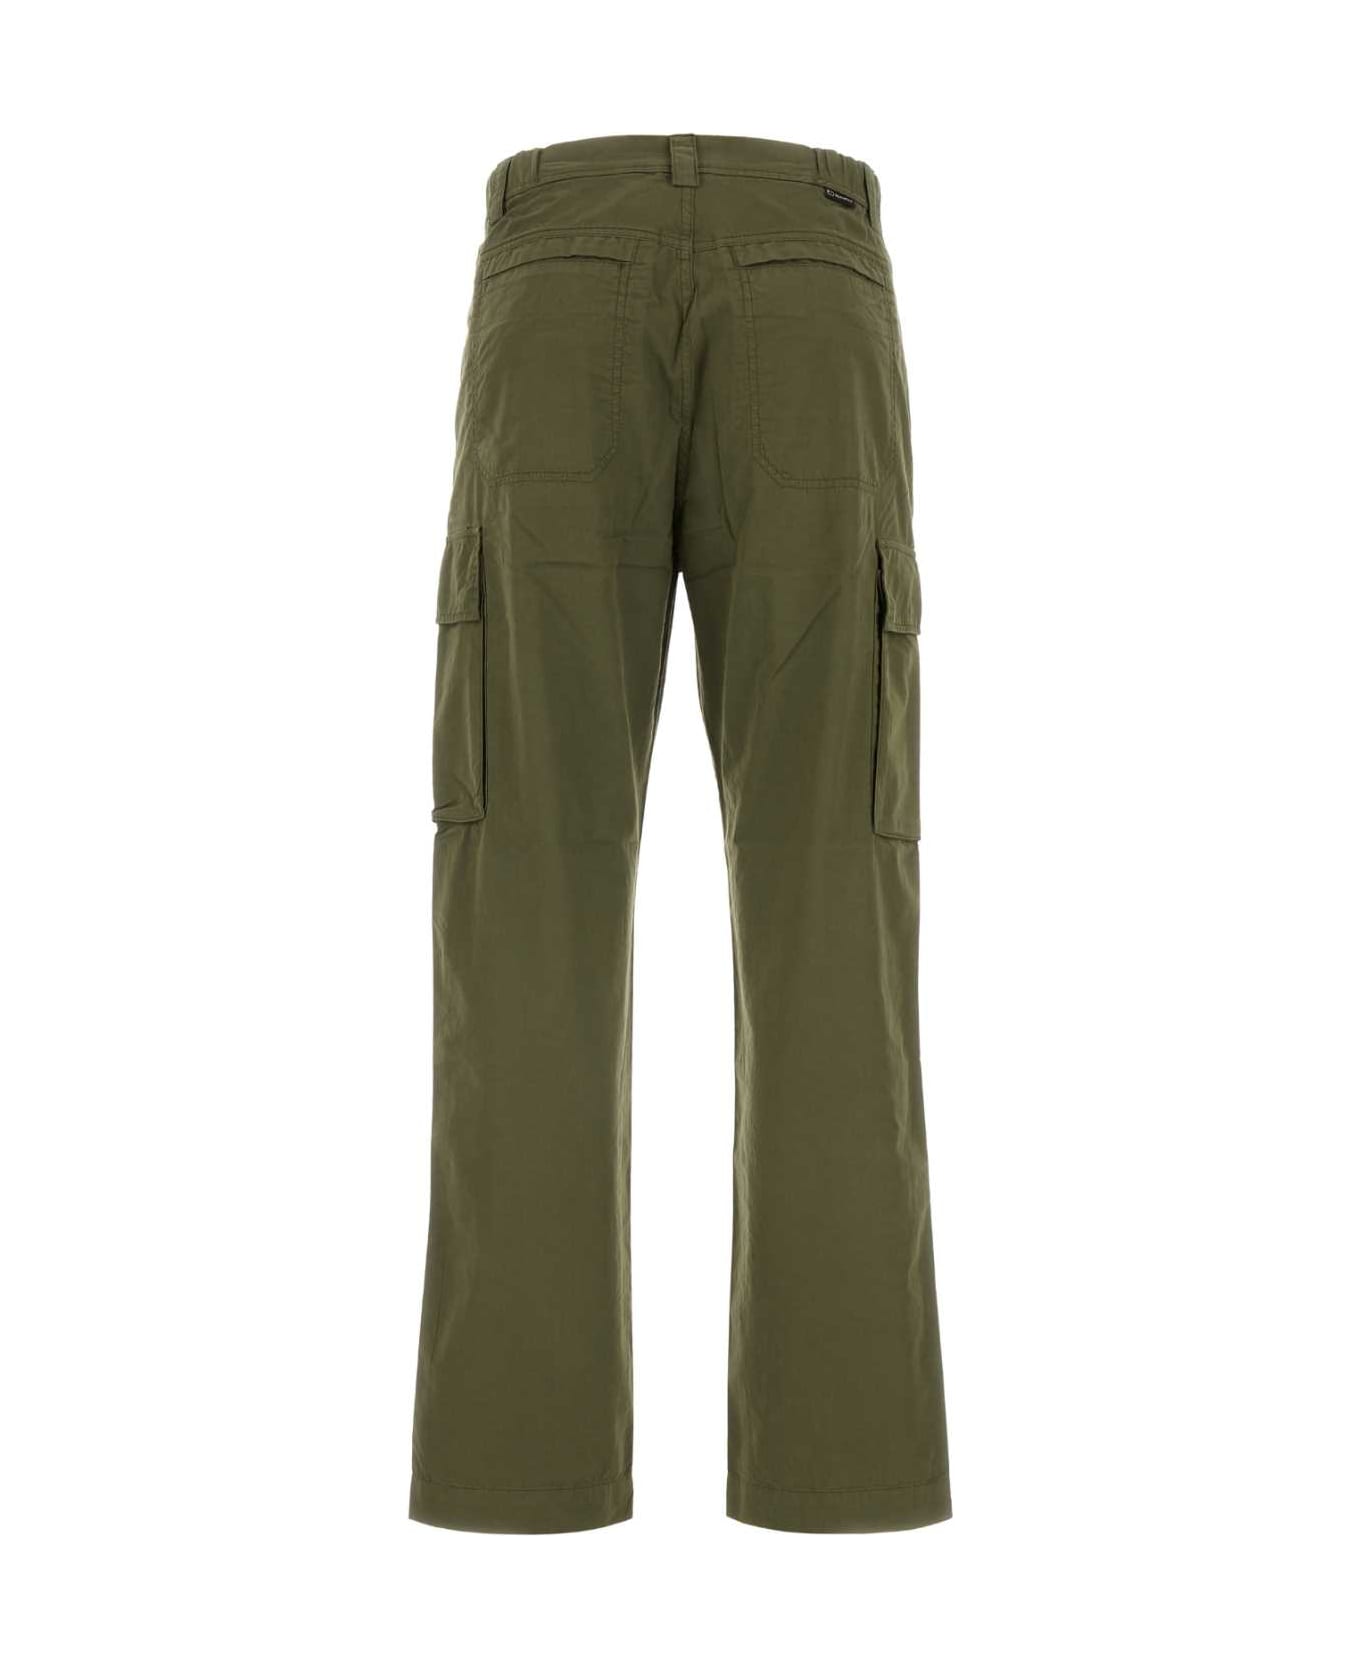 Woolrich Army Green Cotton Pant - 6178 ボトムス